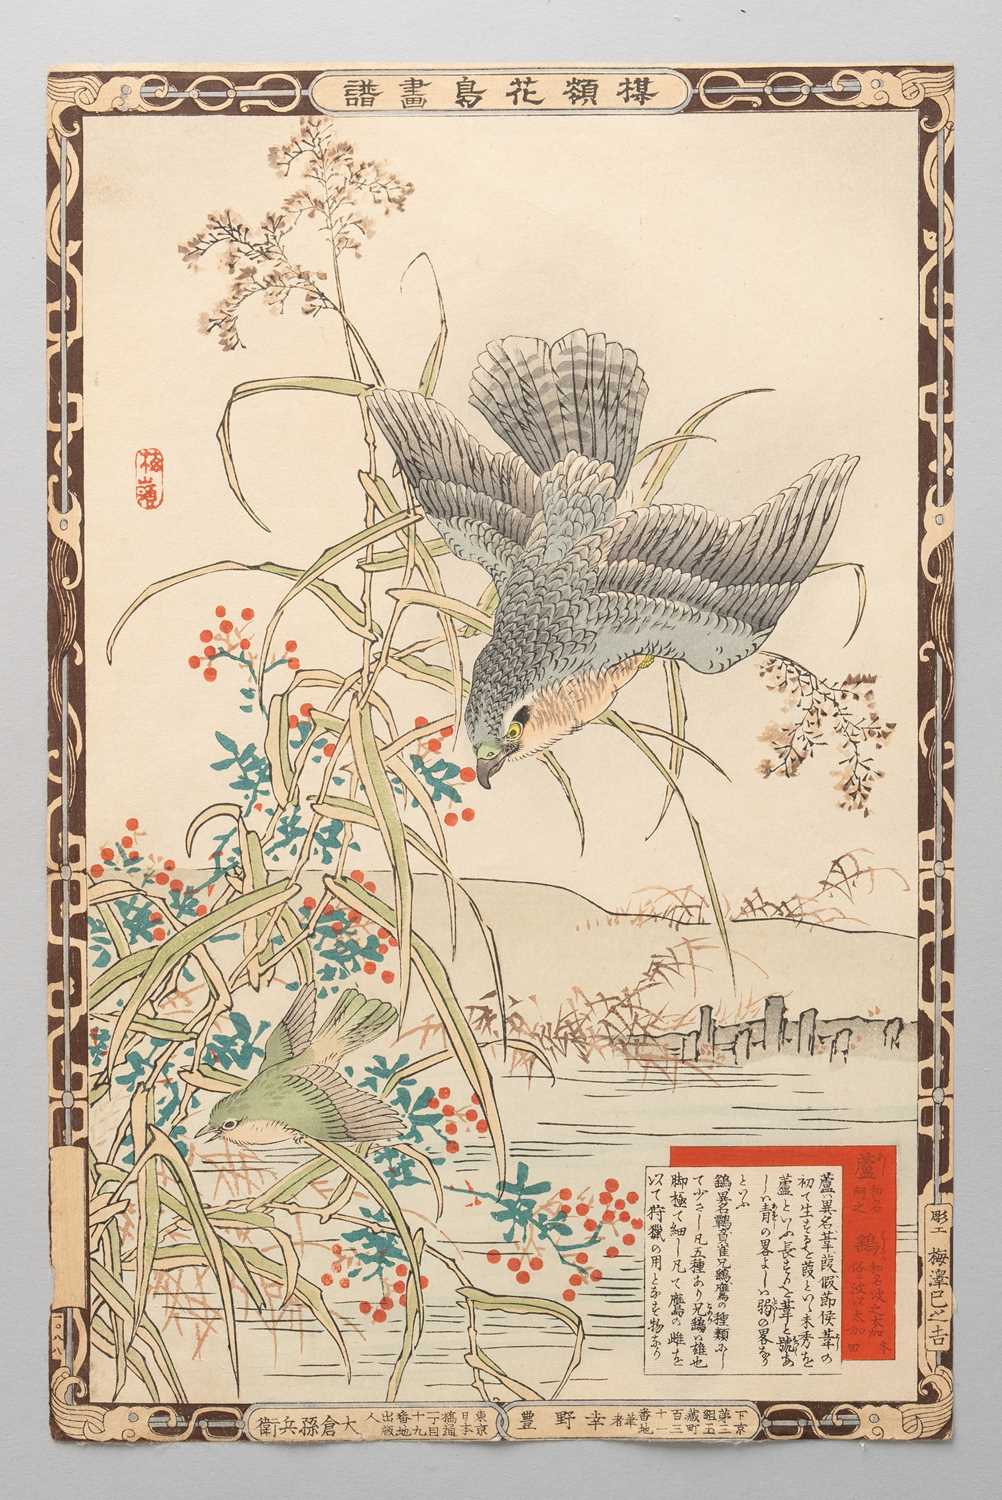 NO RESERVE BAIREI KONO (1844-95) MEIJI ERA, 19TH CENTURY A collection of thirty Japanese woodblock - Image 20 of 30